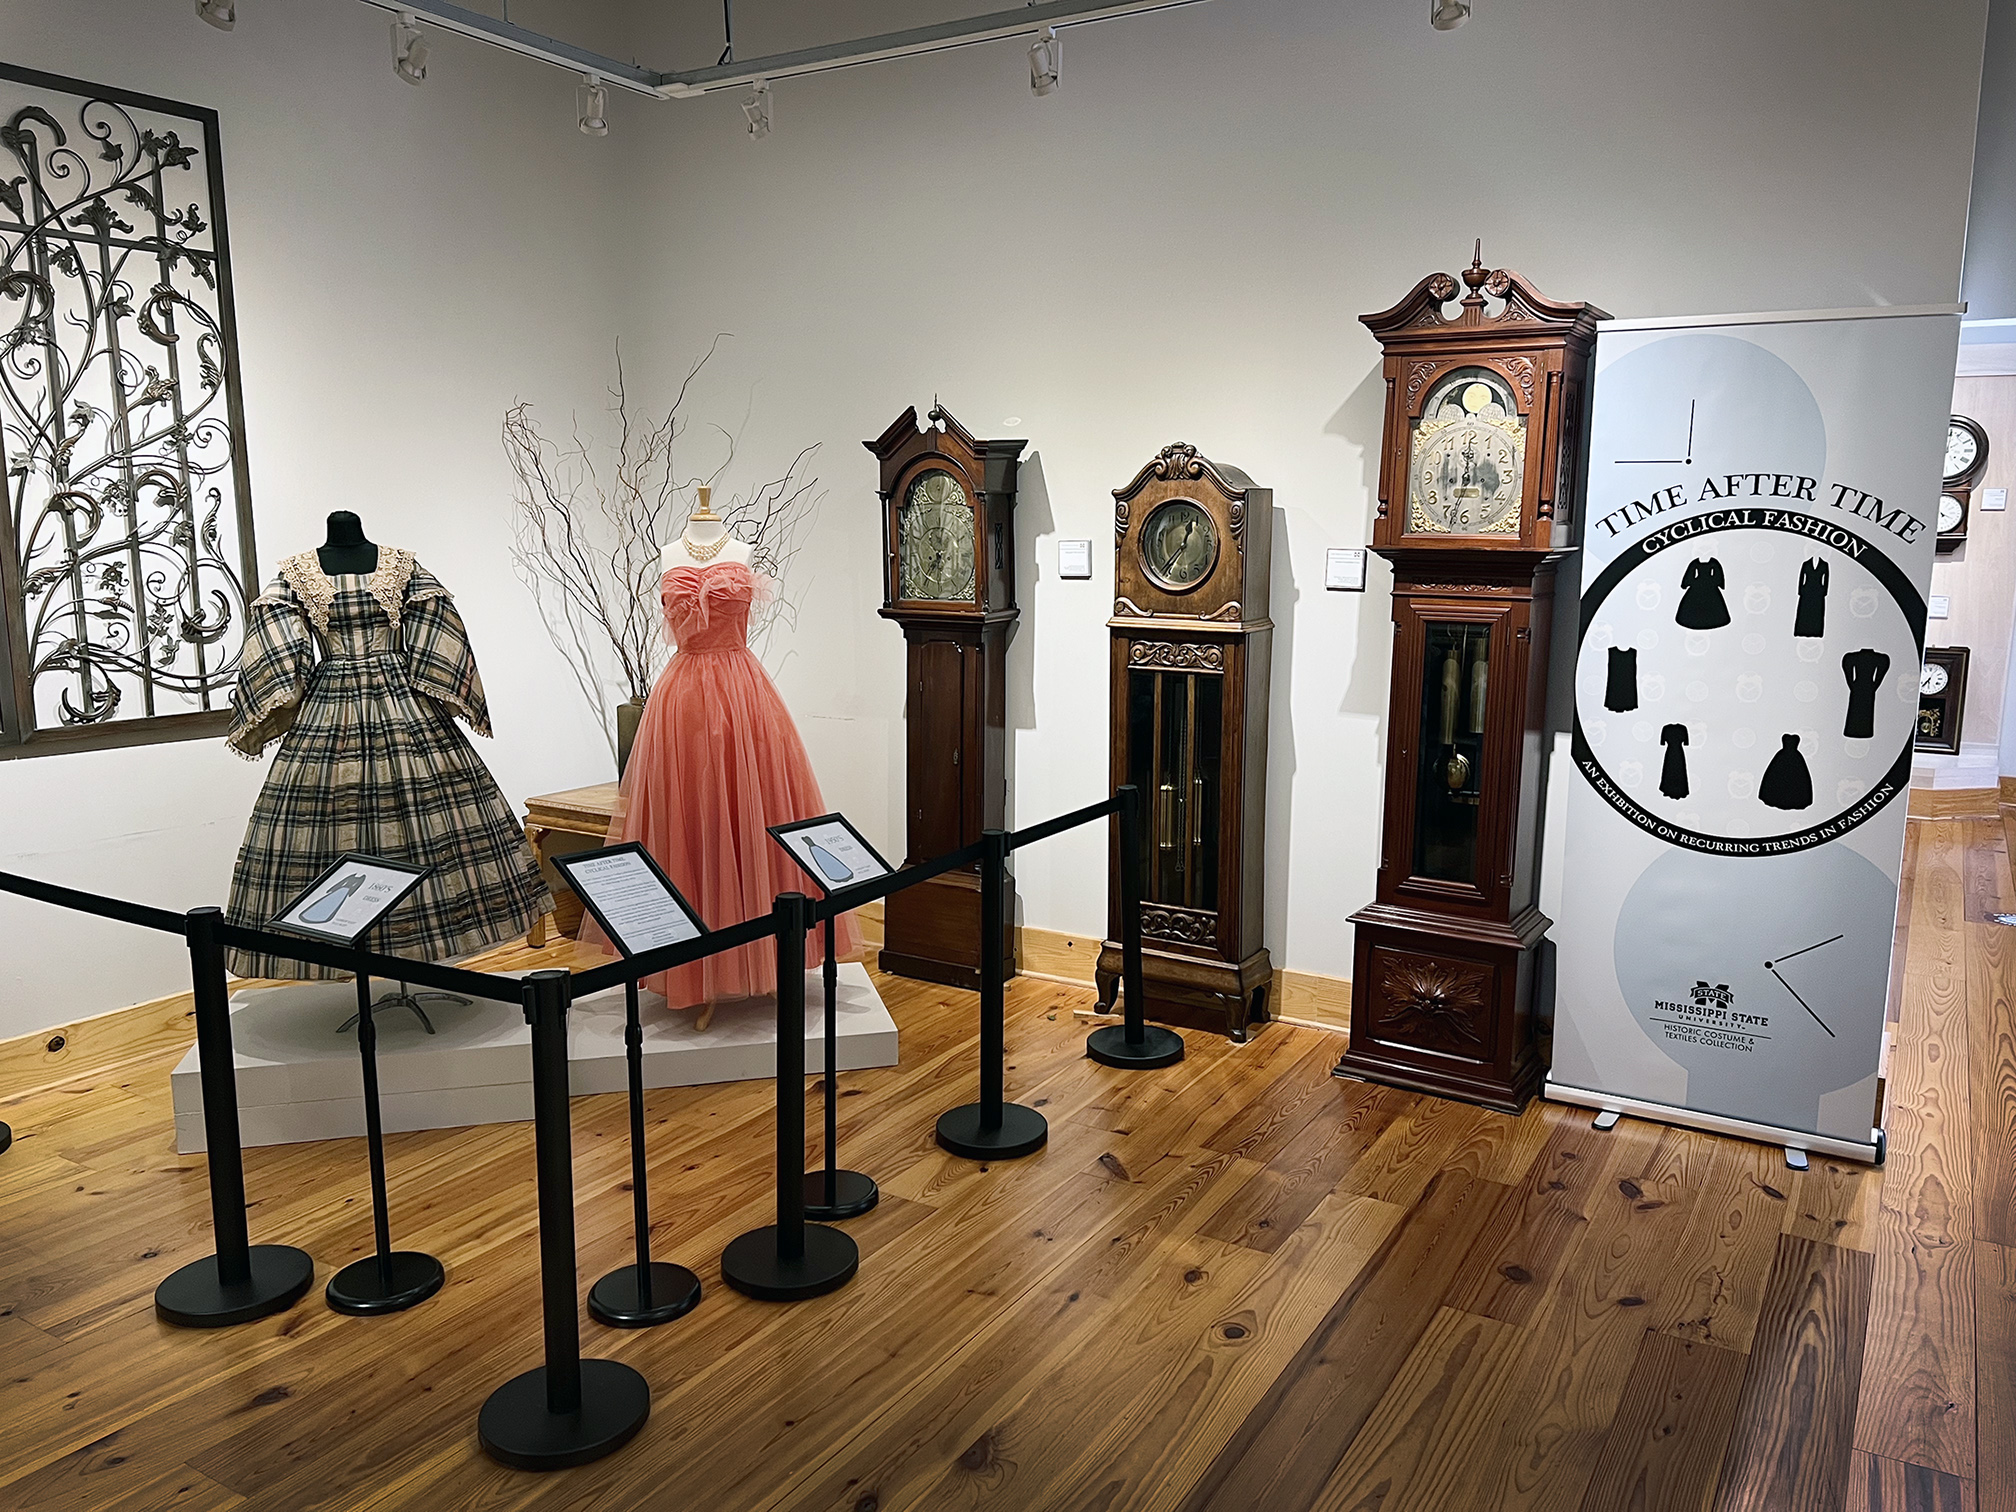 Two dresses on display in a clock museum.